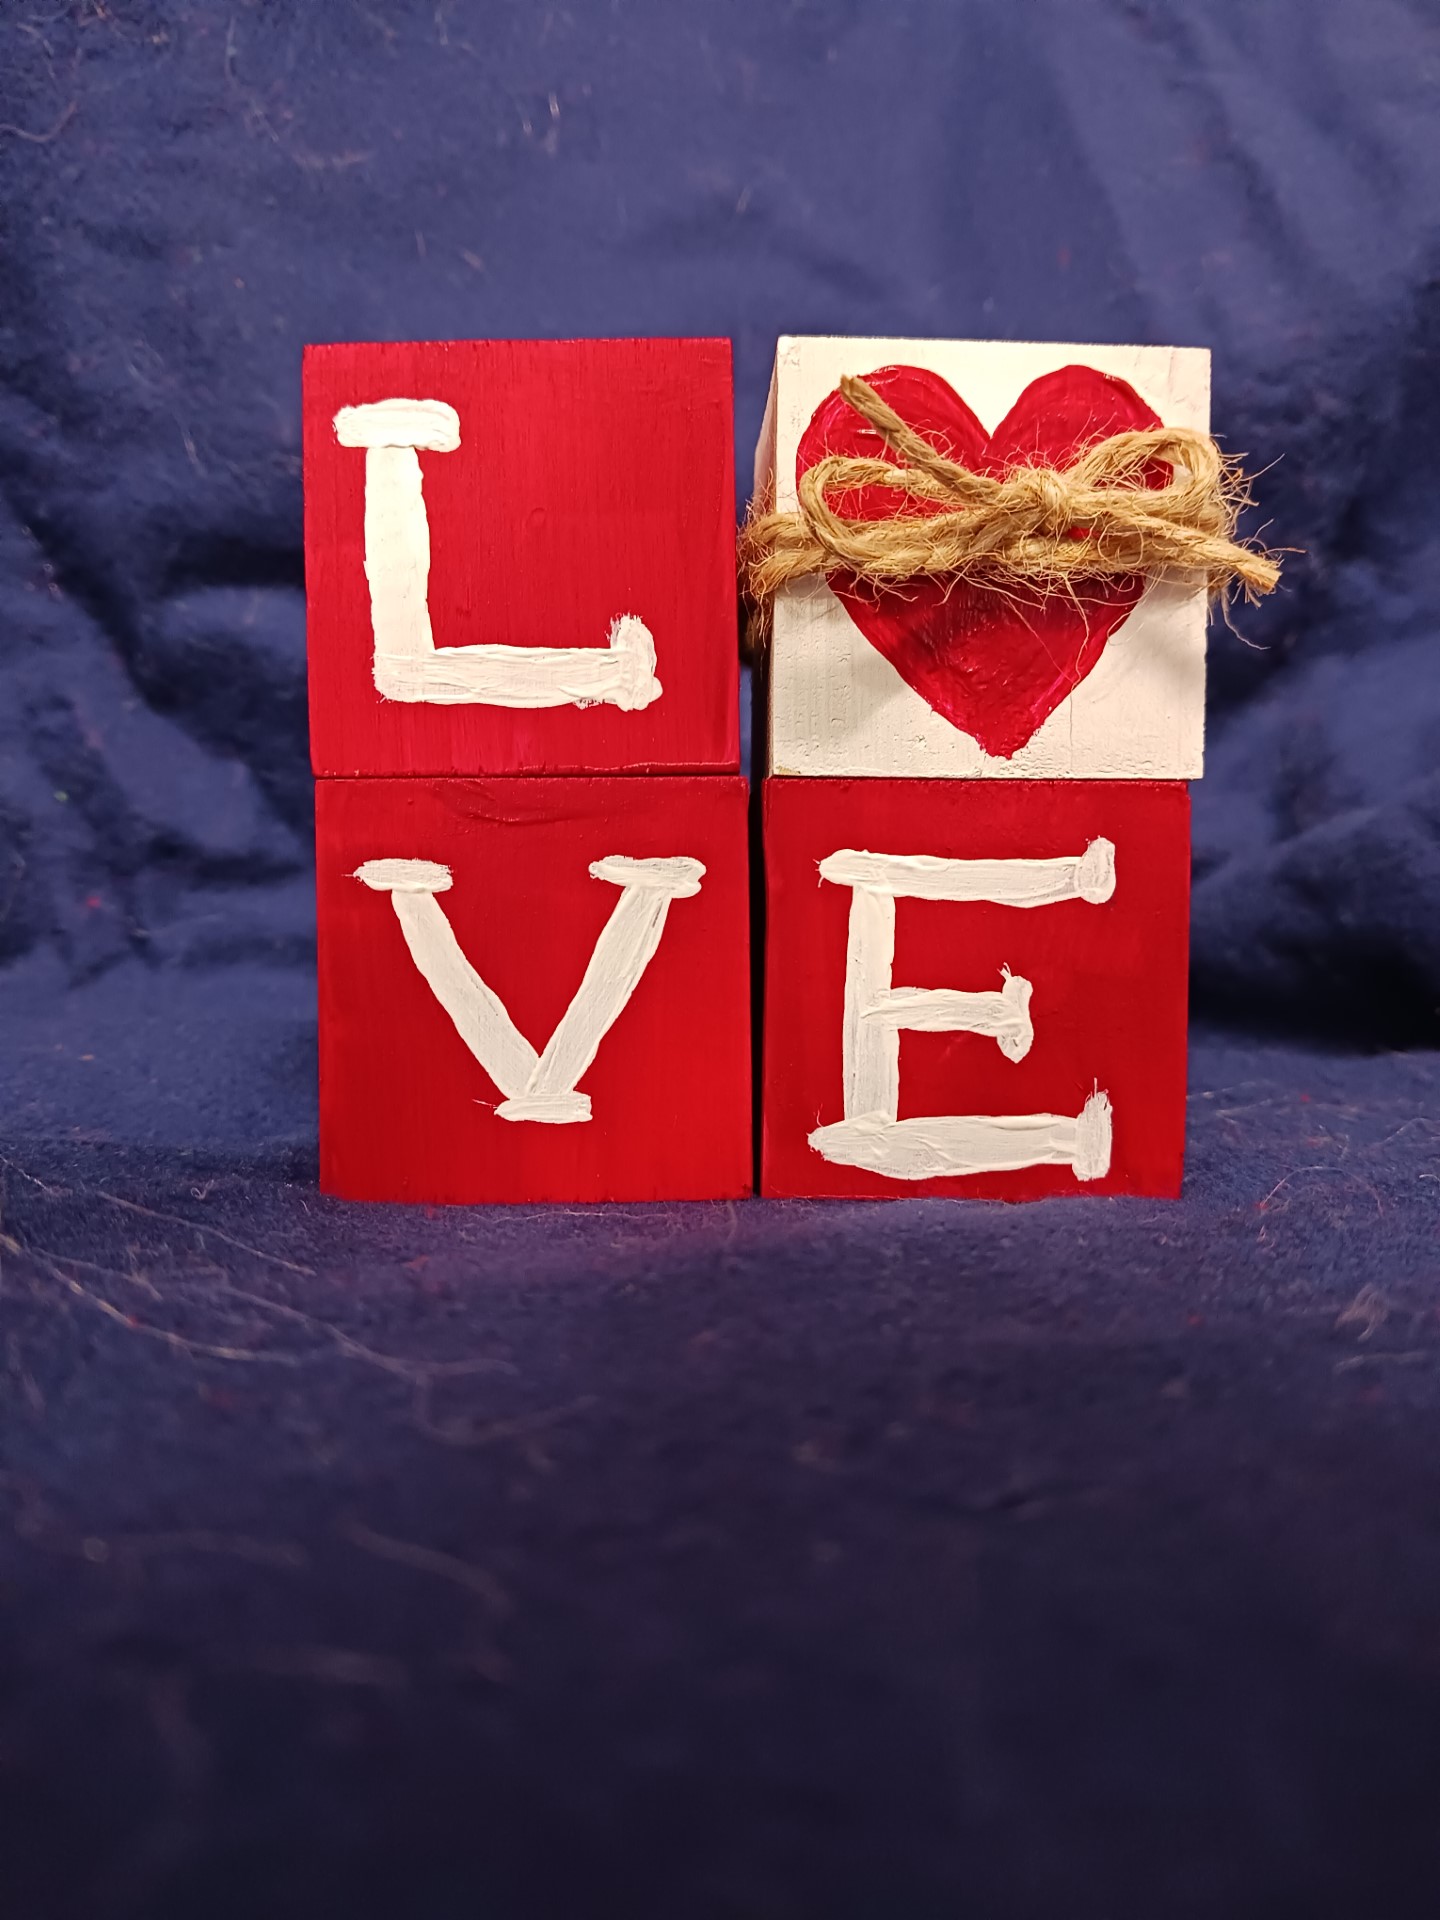 Join us for some fun Valentine Day inspired Crafts!